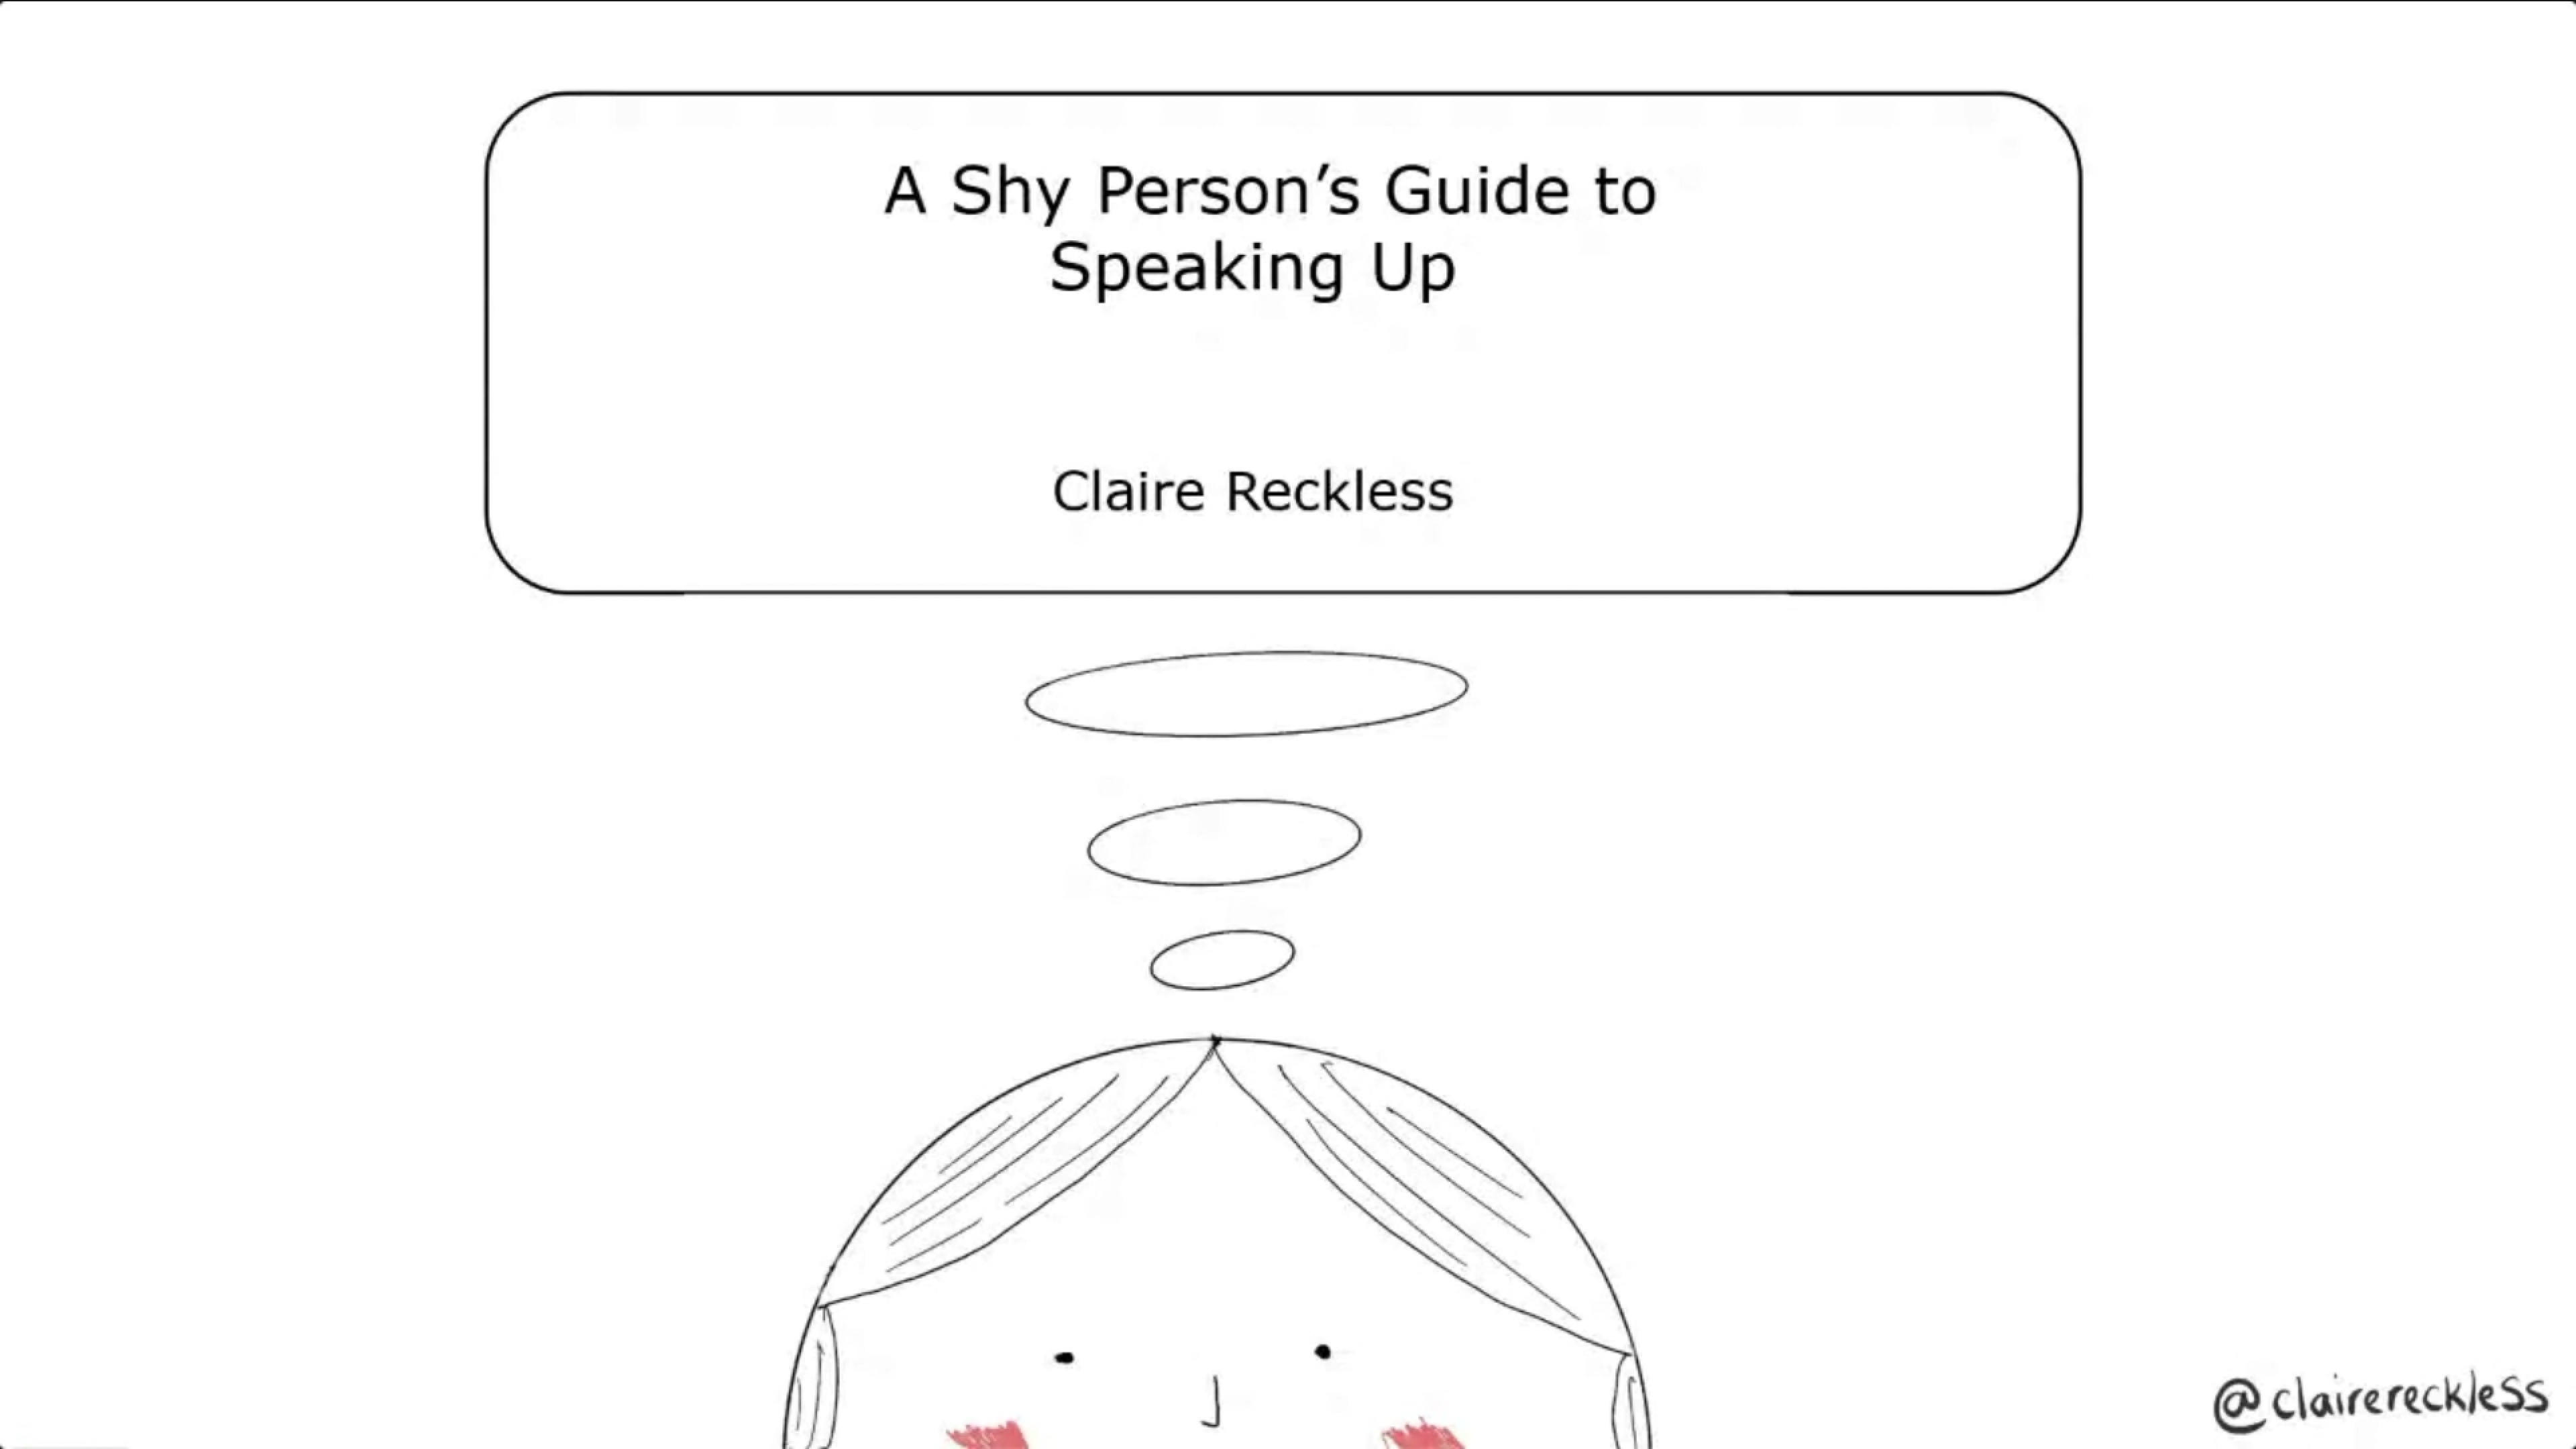 A shy persons guide to speaking up with Claire Reckless